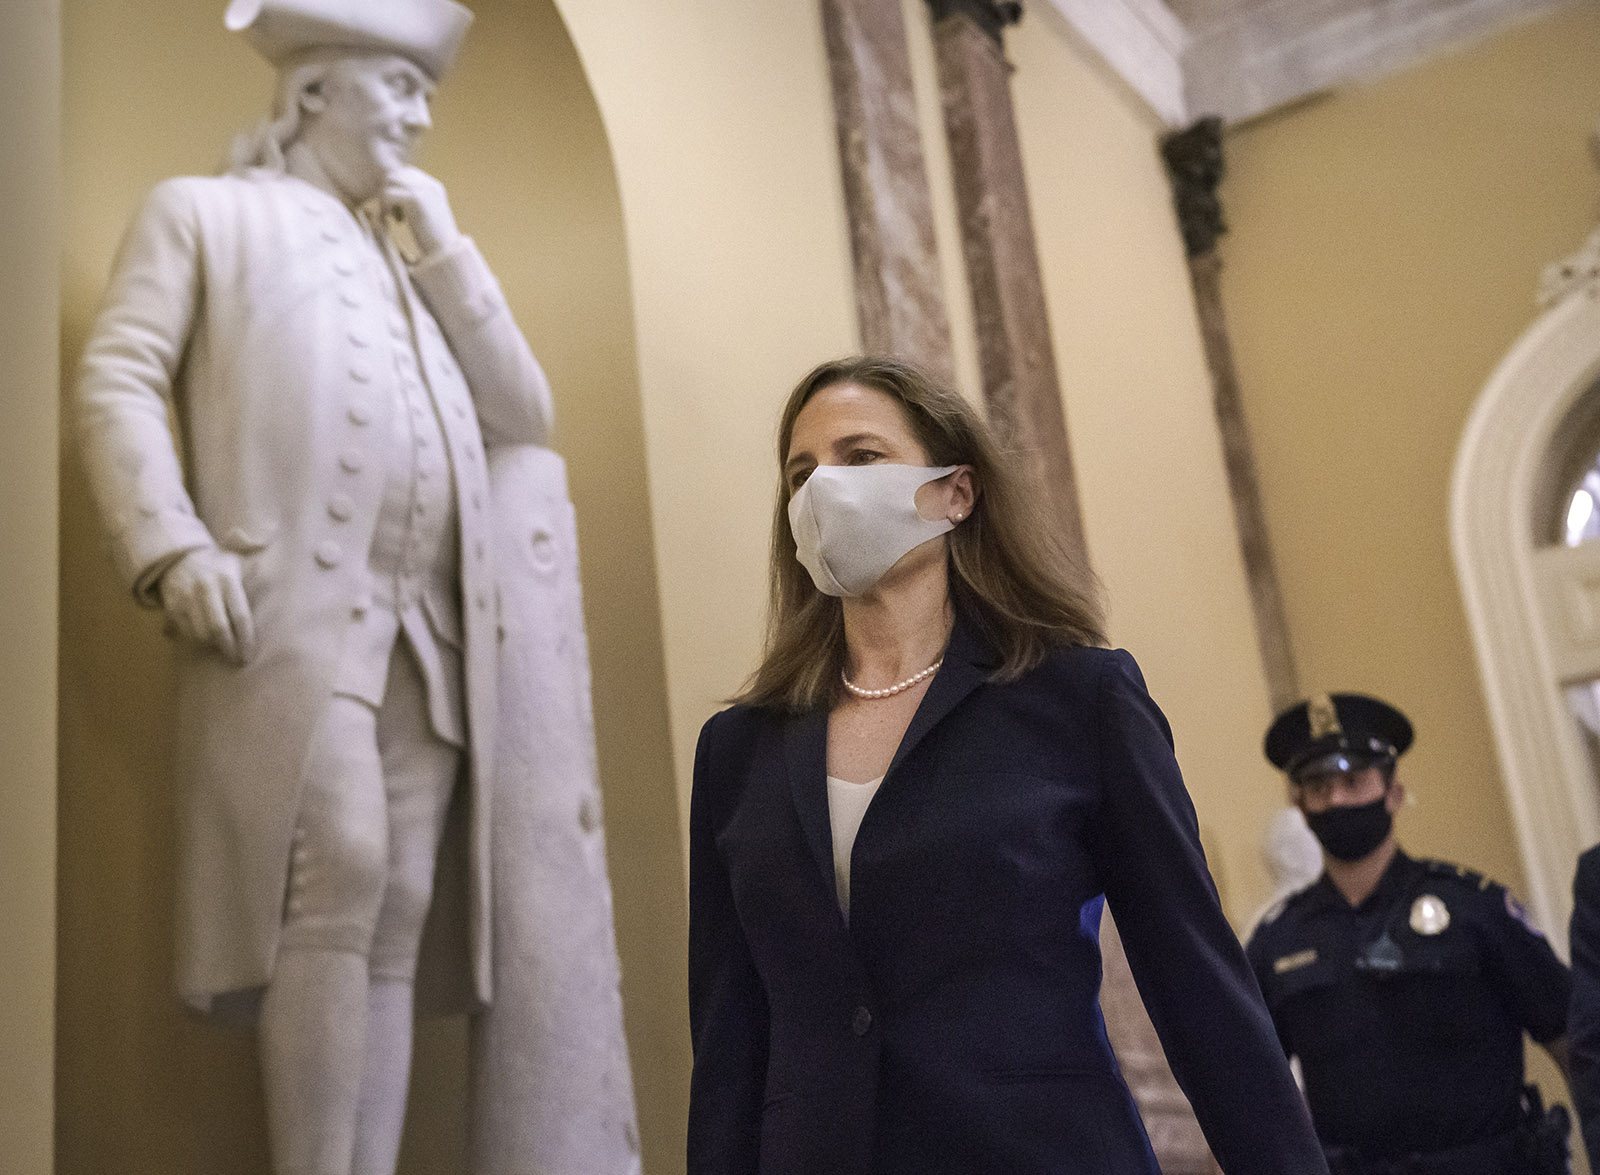 Judge Amy Coney Barrett, President Donald Trump's nominee for the Supreme Court, arrives for closed meetings with senators, at the Capitol in Washington on Wednesday, October 21. 